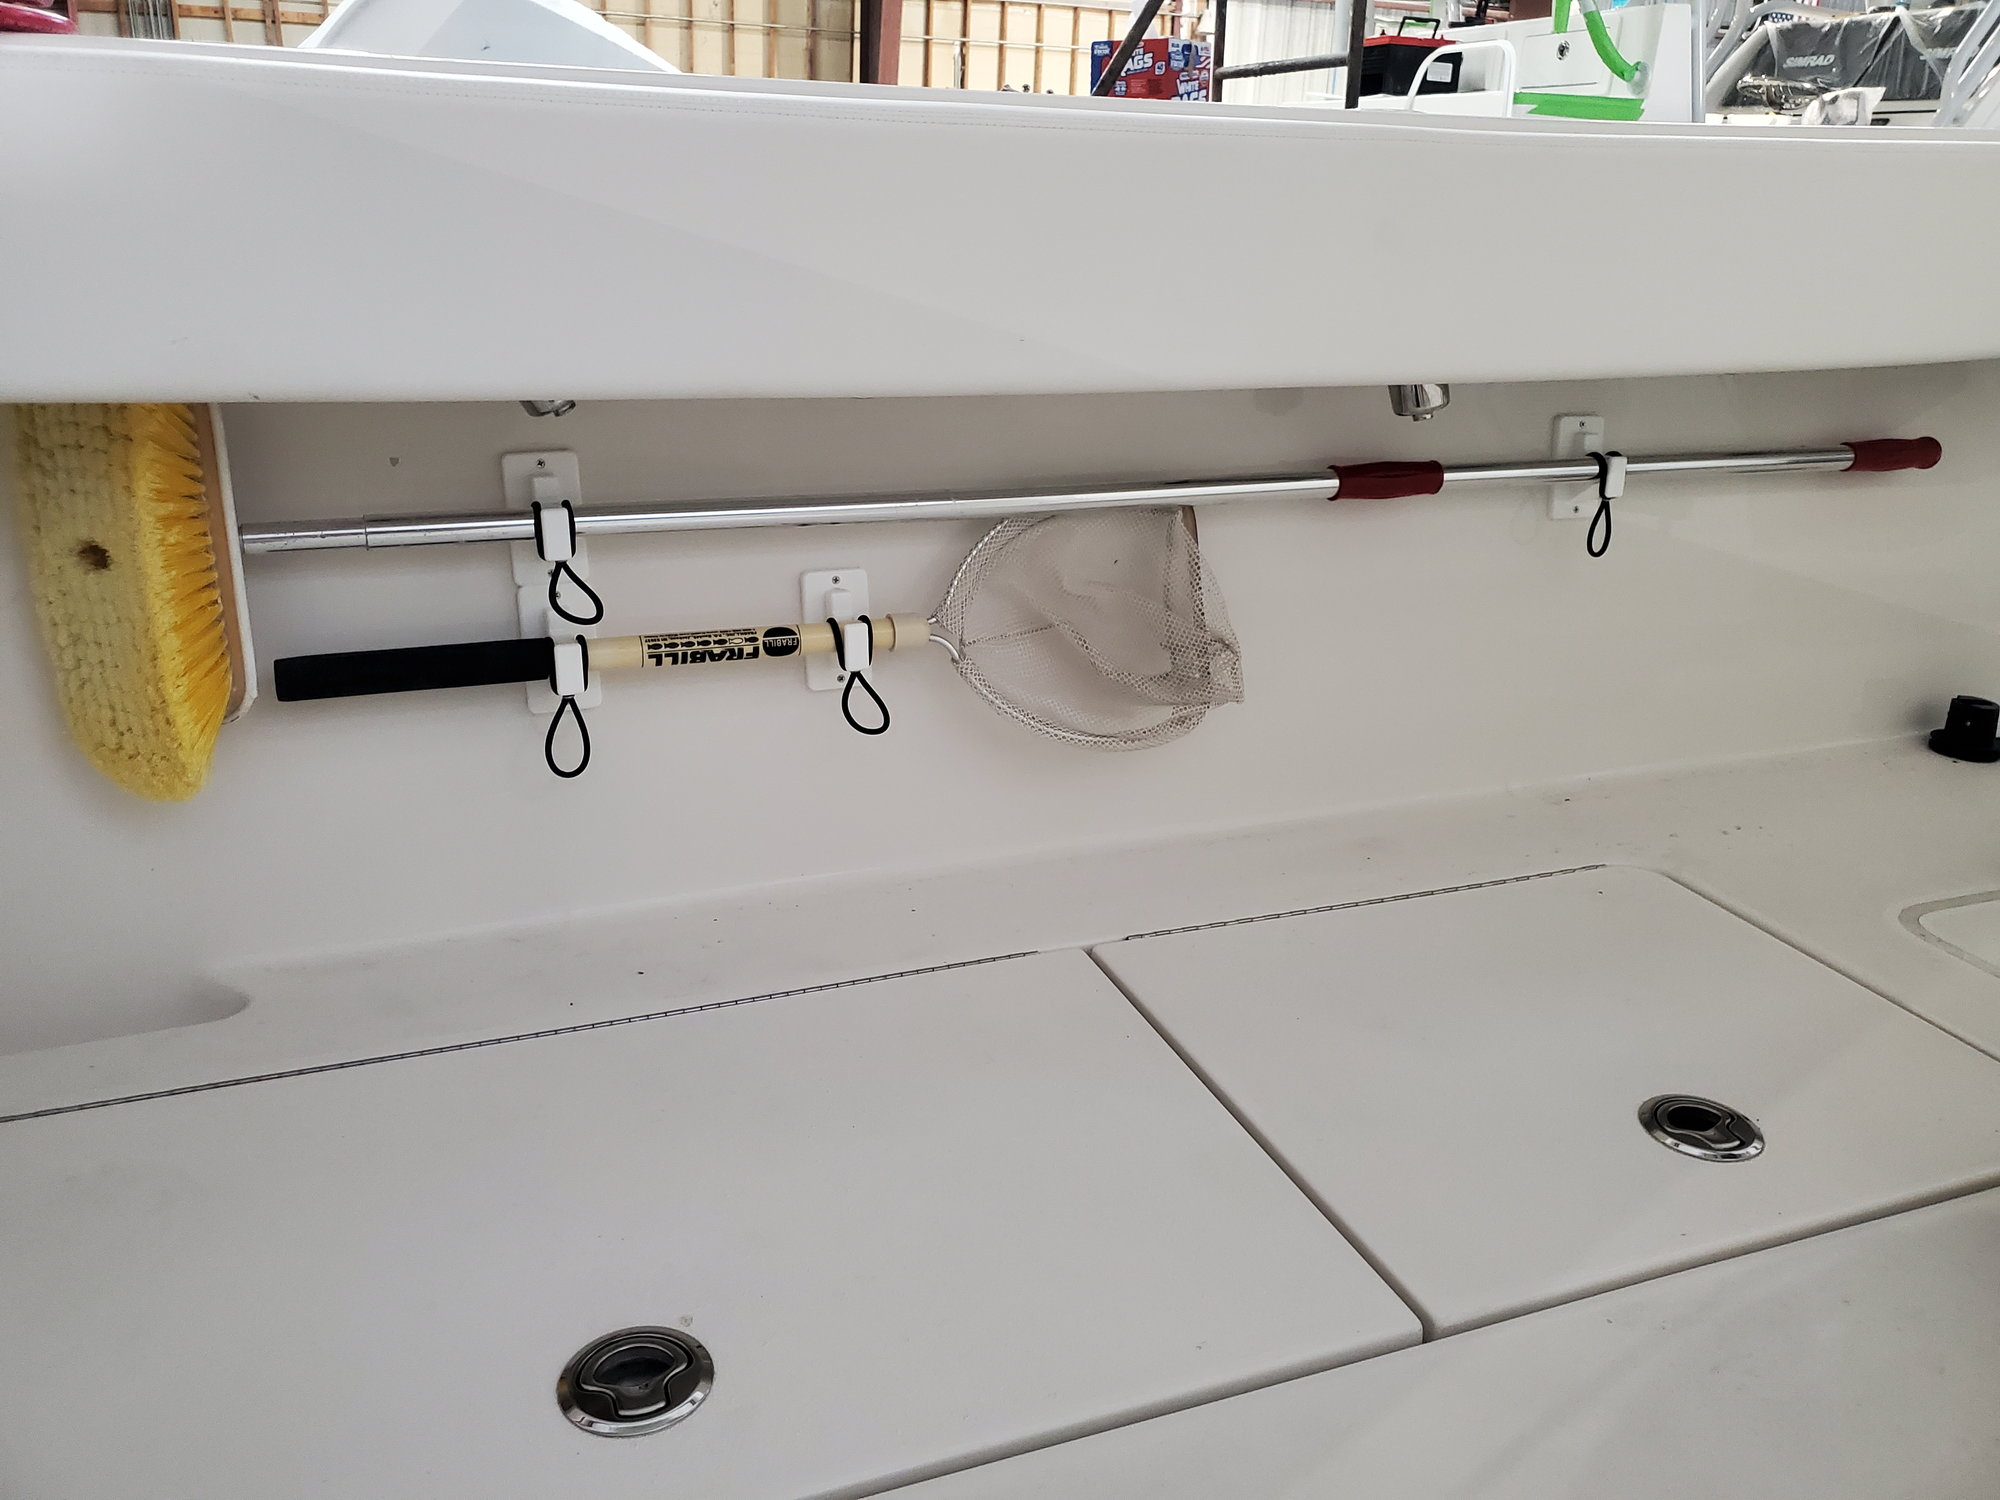 Gaff hook extendable pole - The Hull Truth - Boating and Fishing Forum